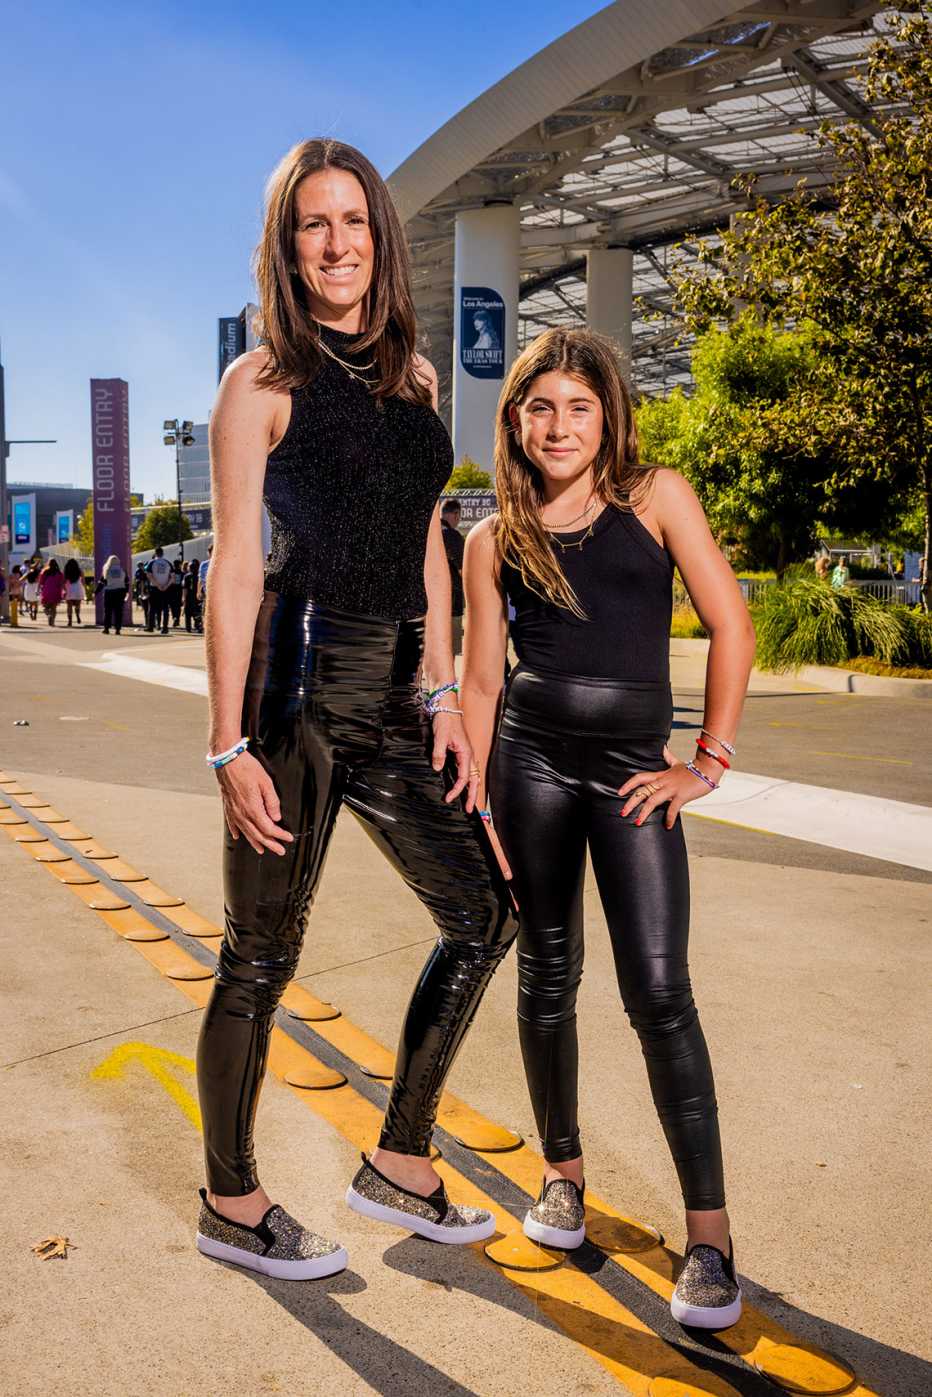 megan parma and daughter kennedy parma in all black outfits posing outside of sofi stadium in los angeles california